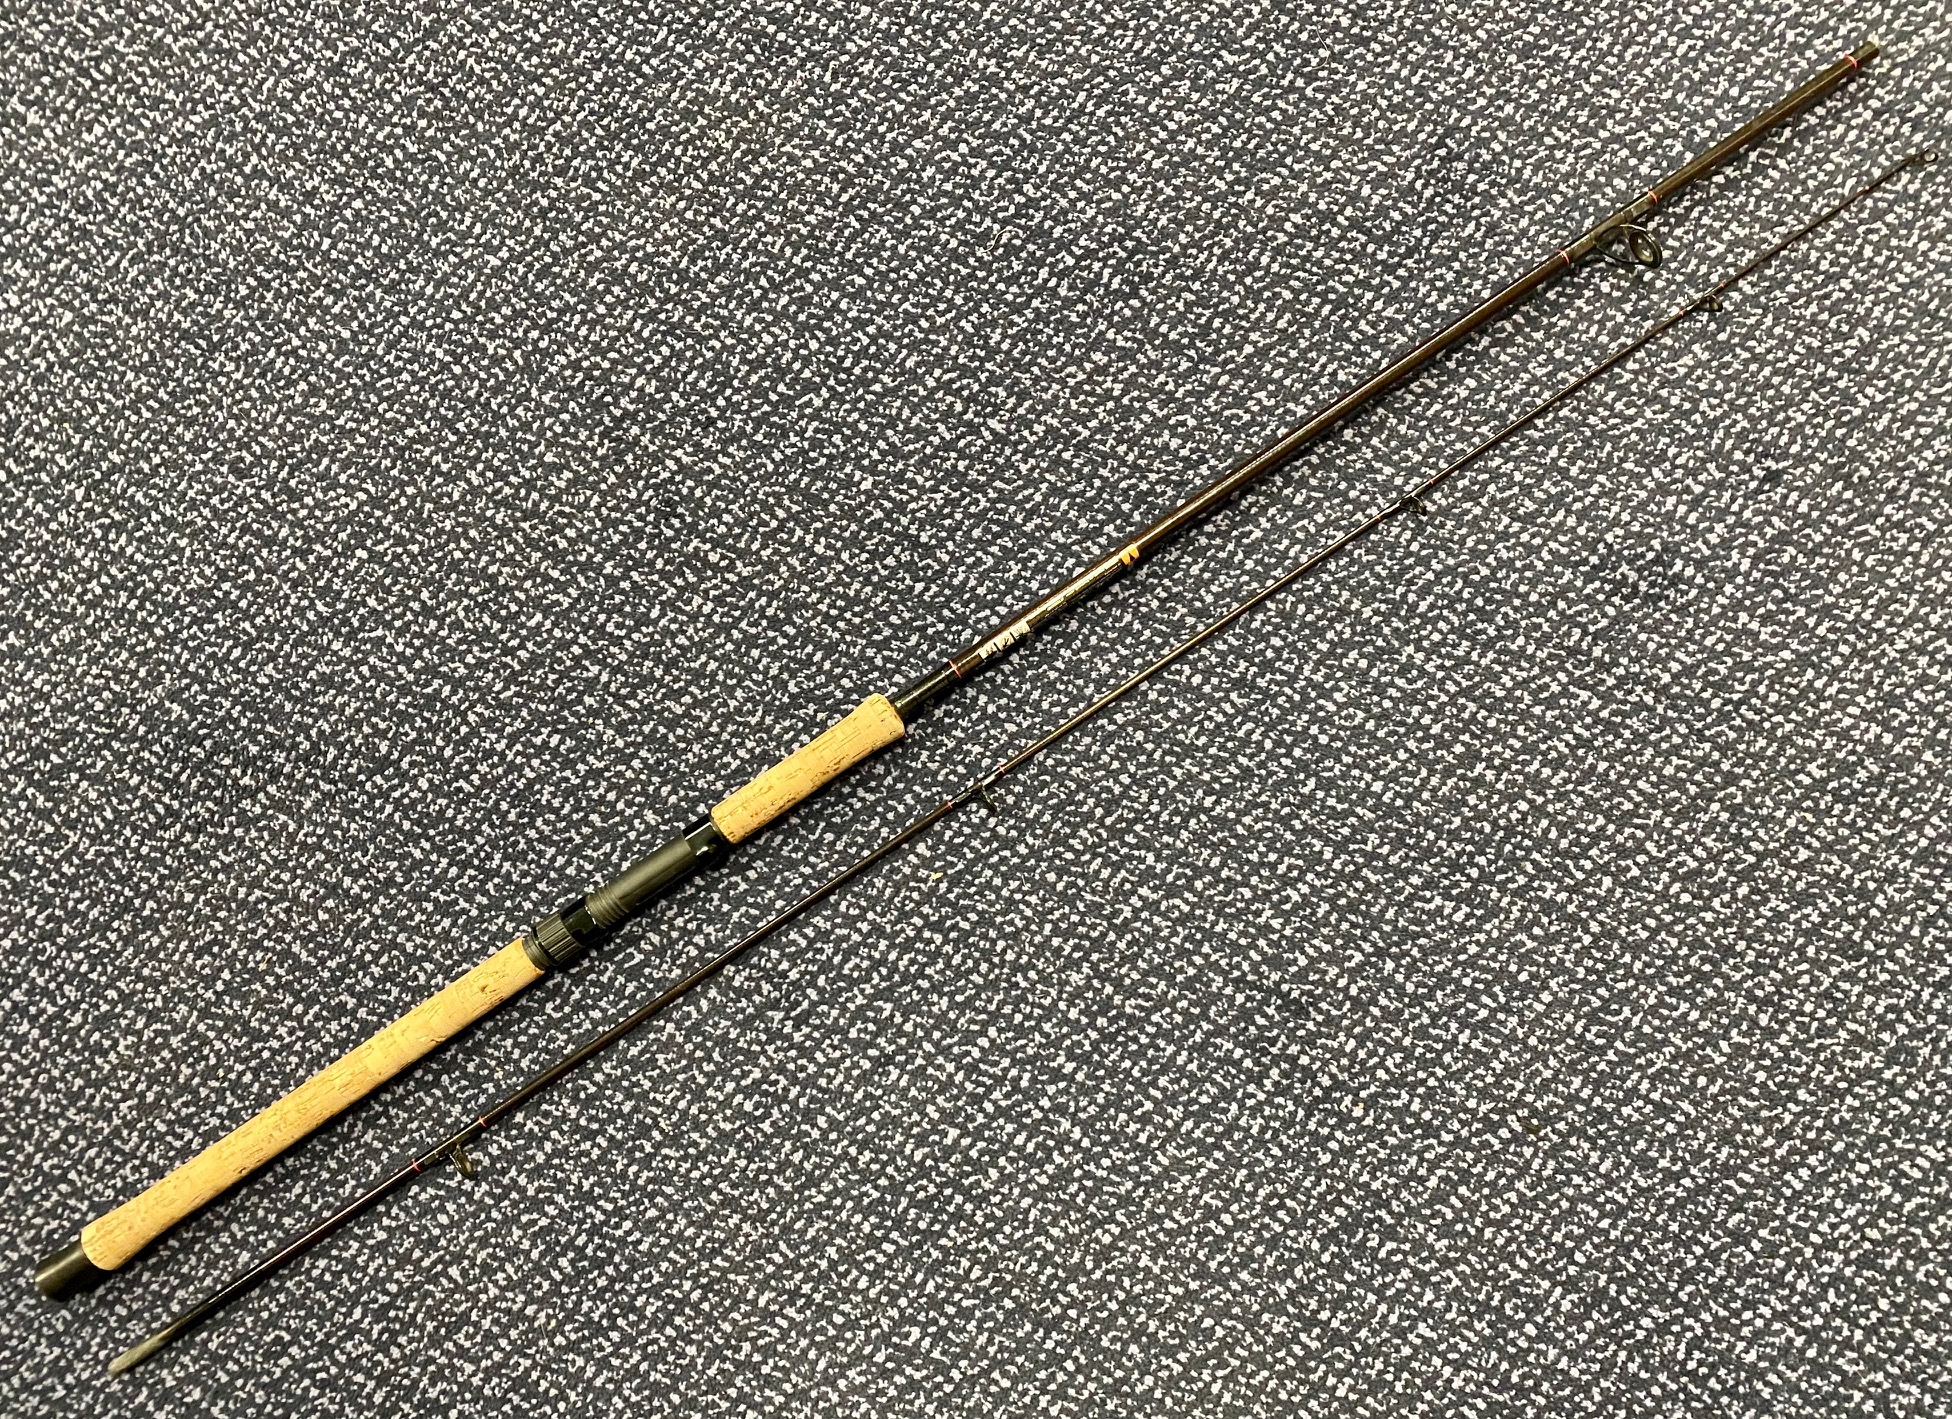 Preloved Daiwa Carbo Regal Spin 8ft 7-25g 2 piece made in Scotland (in bag)  - Used – Glasgow Angling Centre